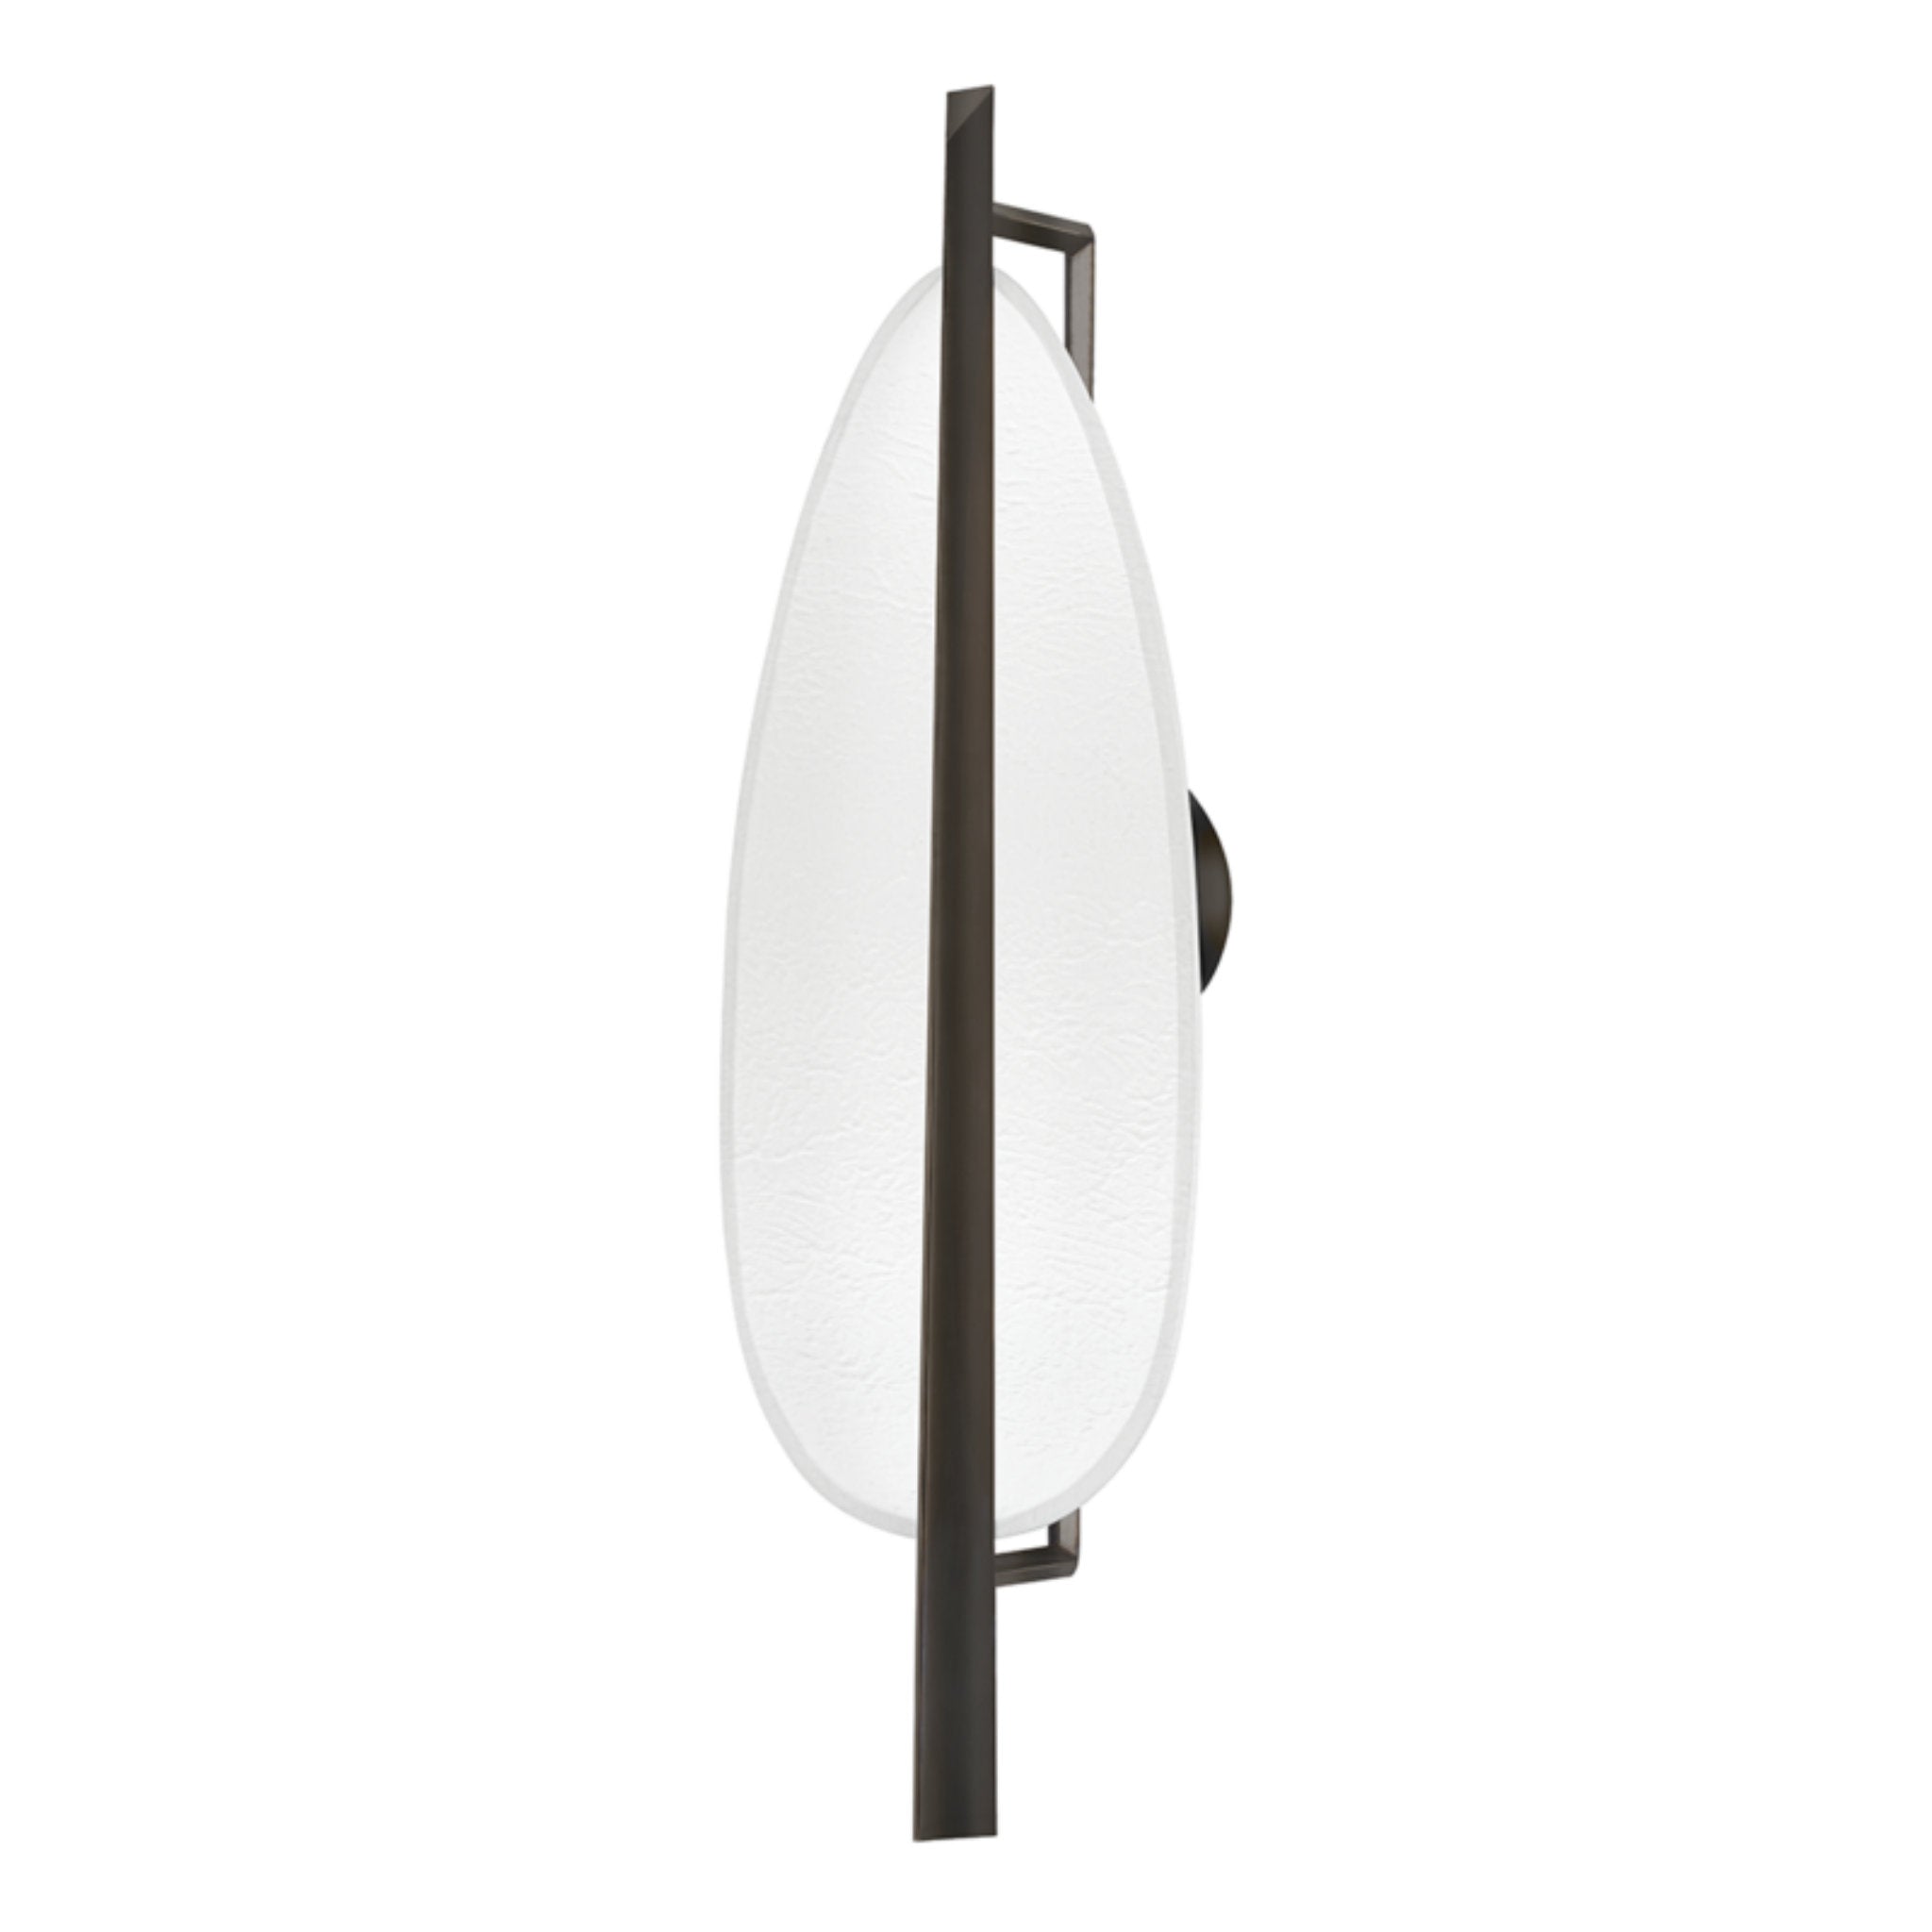 Ithaca 1 Light Wall Sconce in Black Nickel/white Plaster